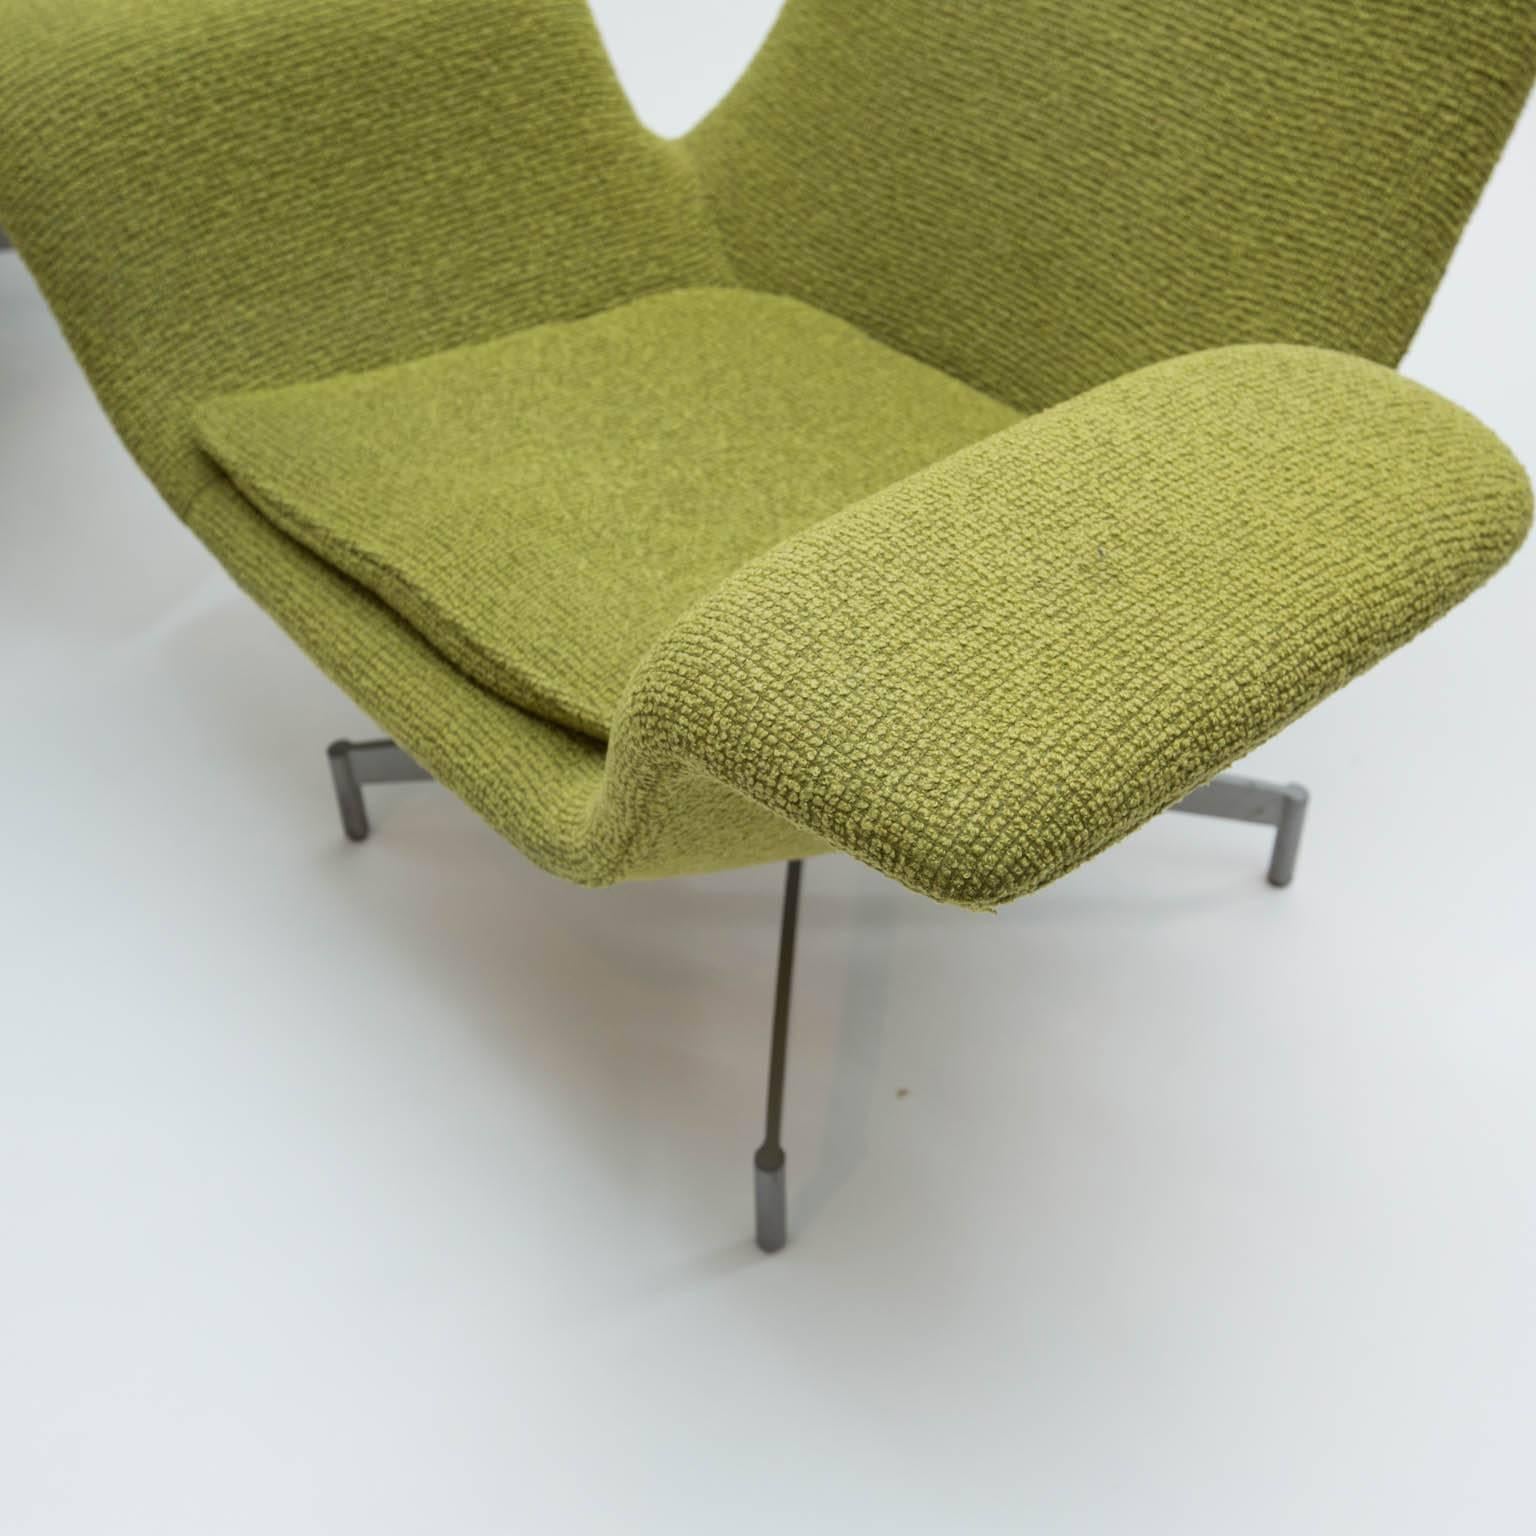 Star Trek-like pair of swivel chair by HBF fruniture. Durable, green, wool-like fabric with heavy steel bases in a satin pewter powder coat.